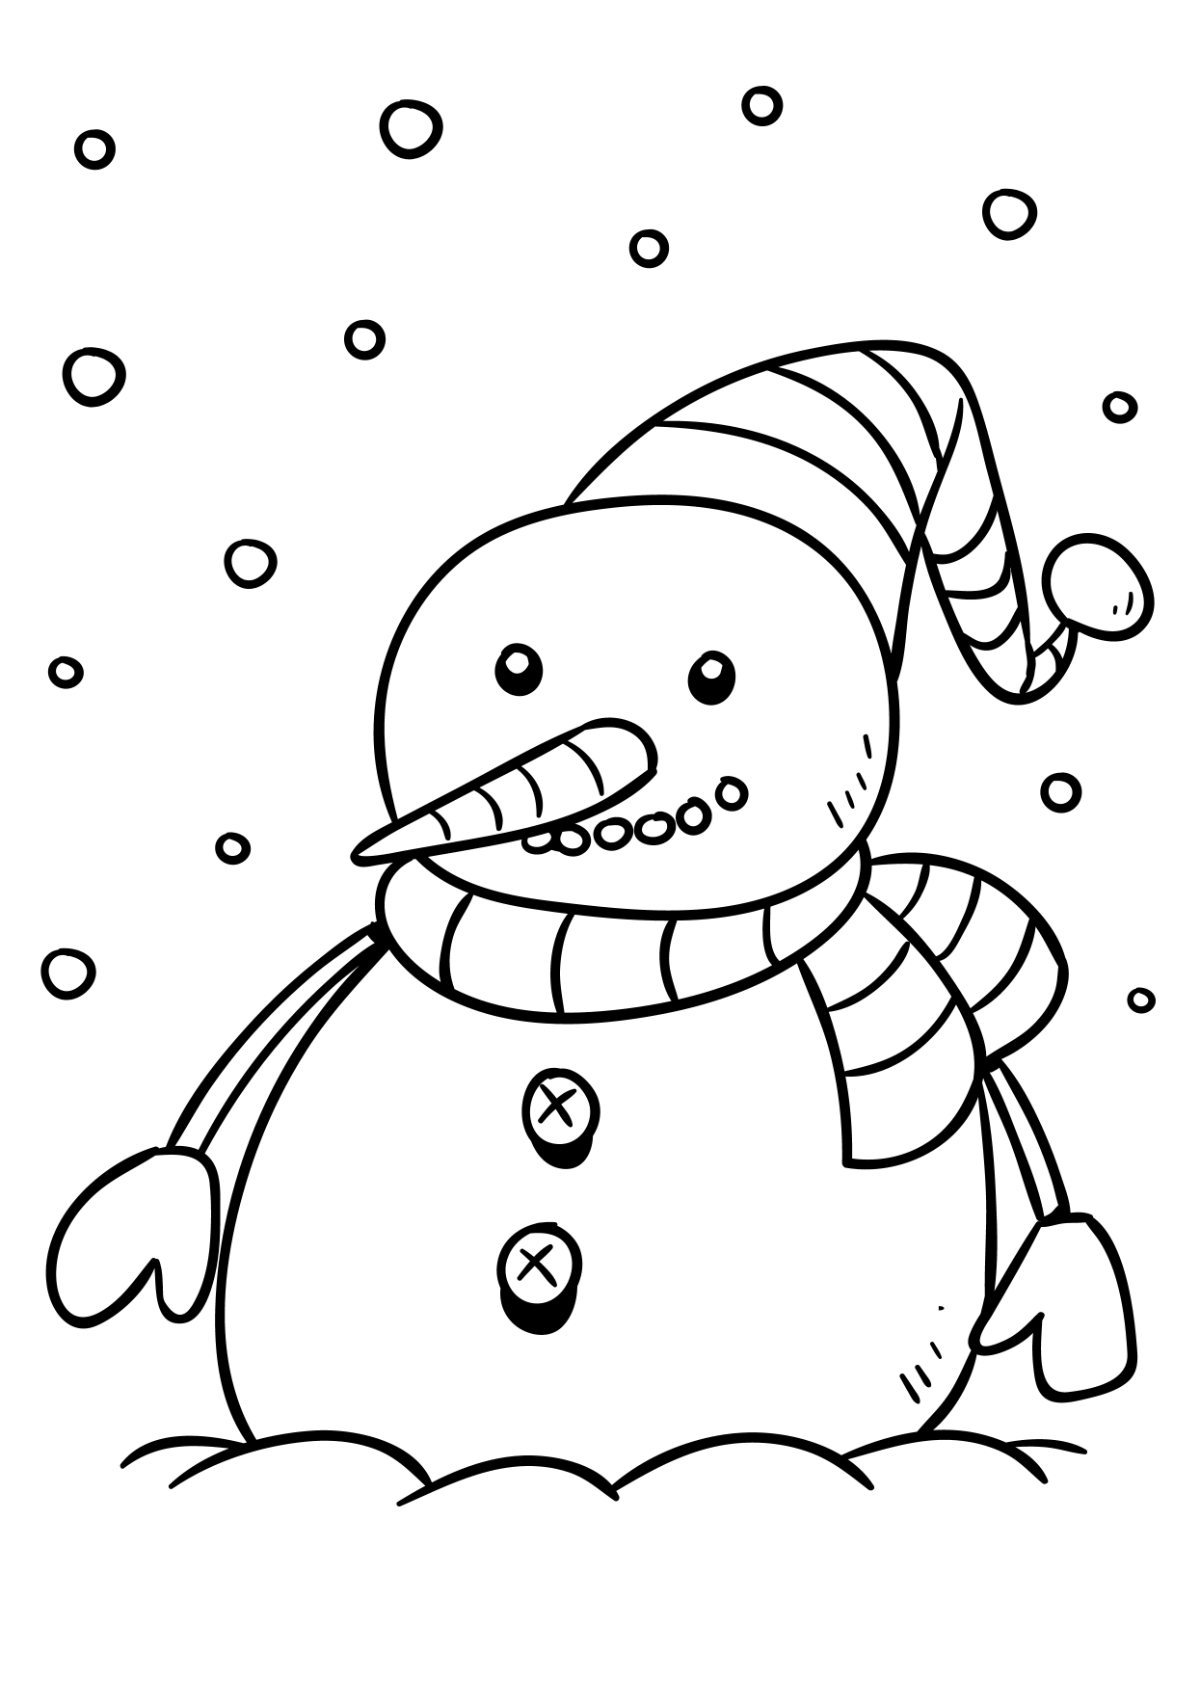 Sketch christmas snowman in vintage style Vector Image